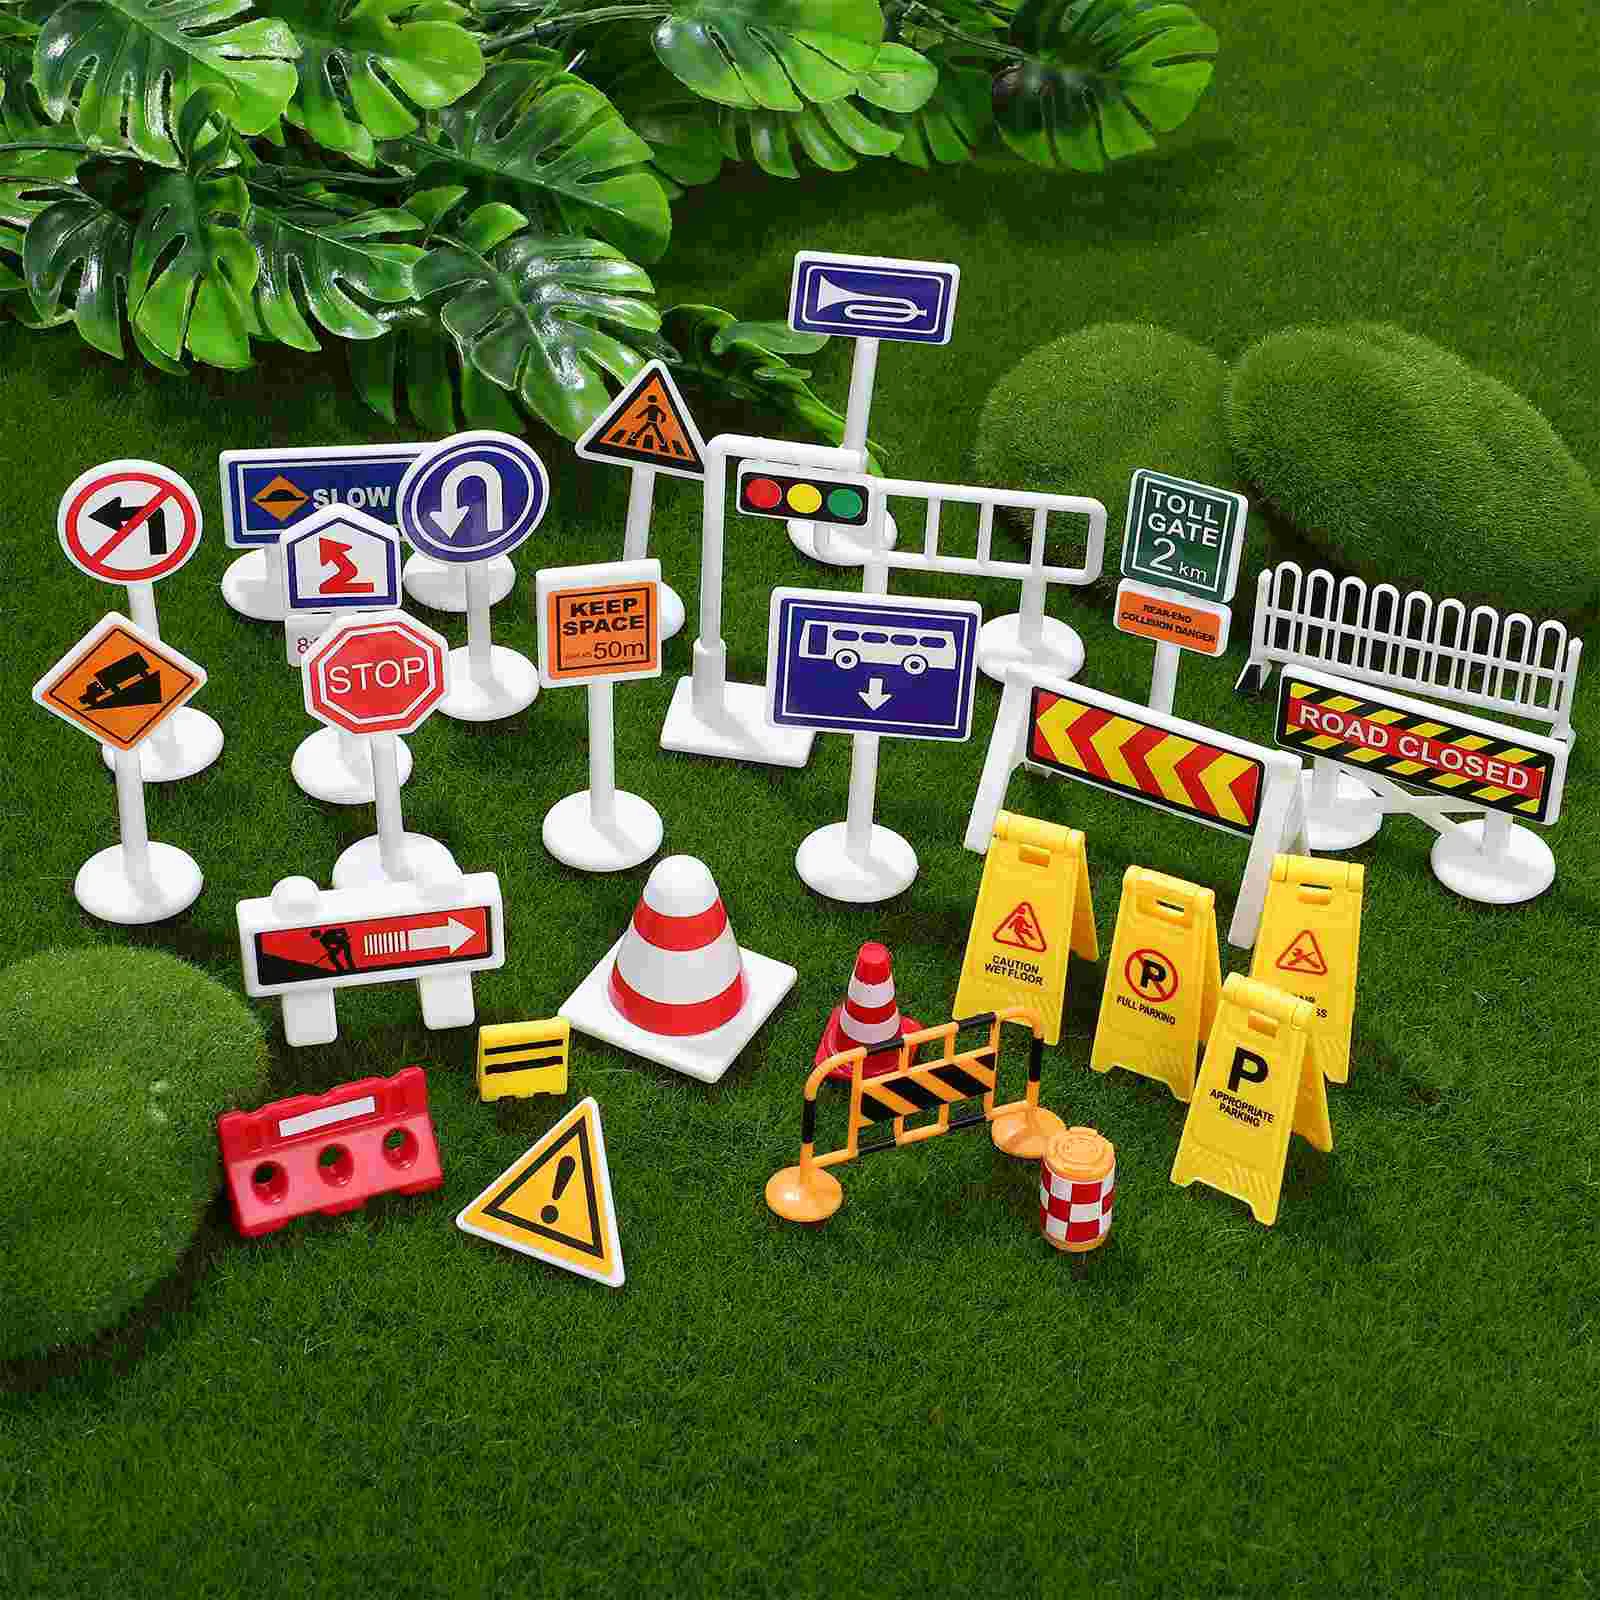 

Barricade Sign Toys Traffic Signs Ornament Street Playset Road Game Kids'+electric+vehicles Prop Miniatures Light Cone Models